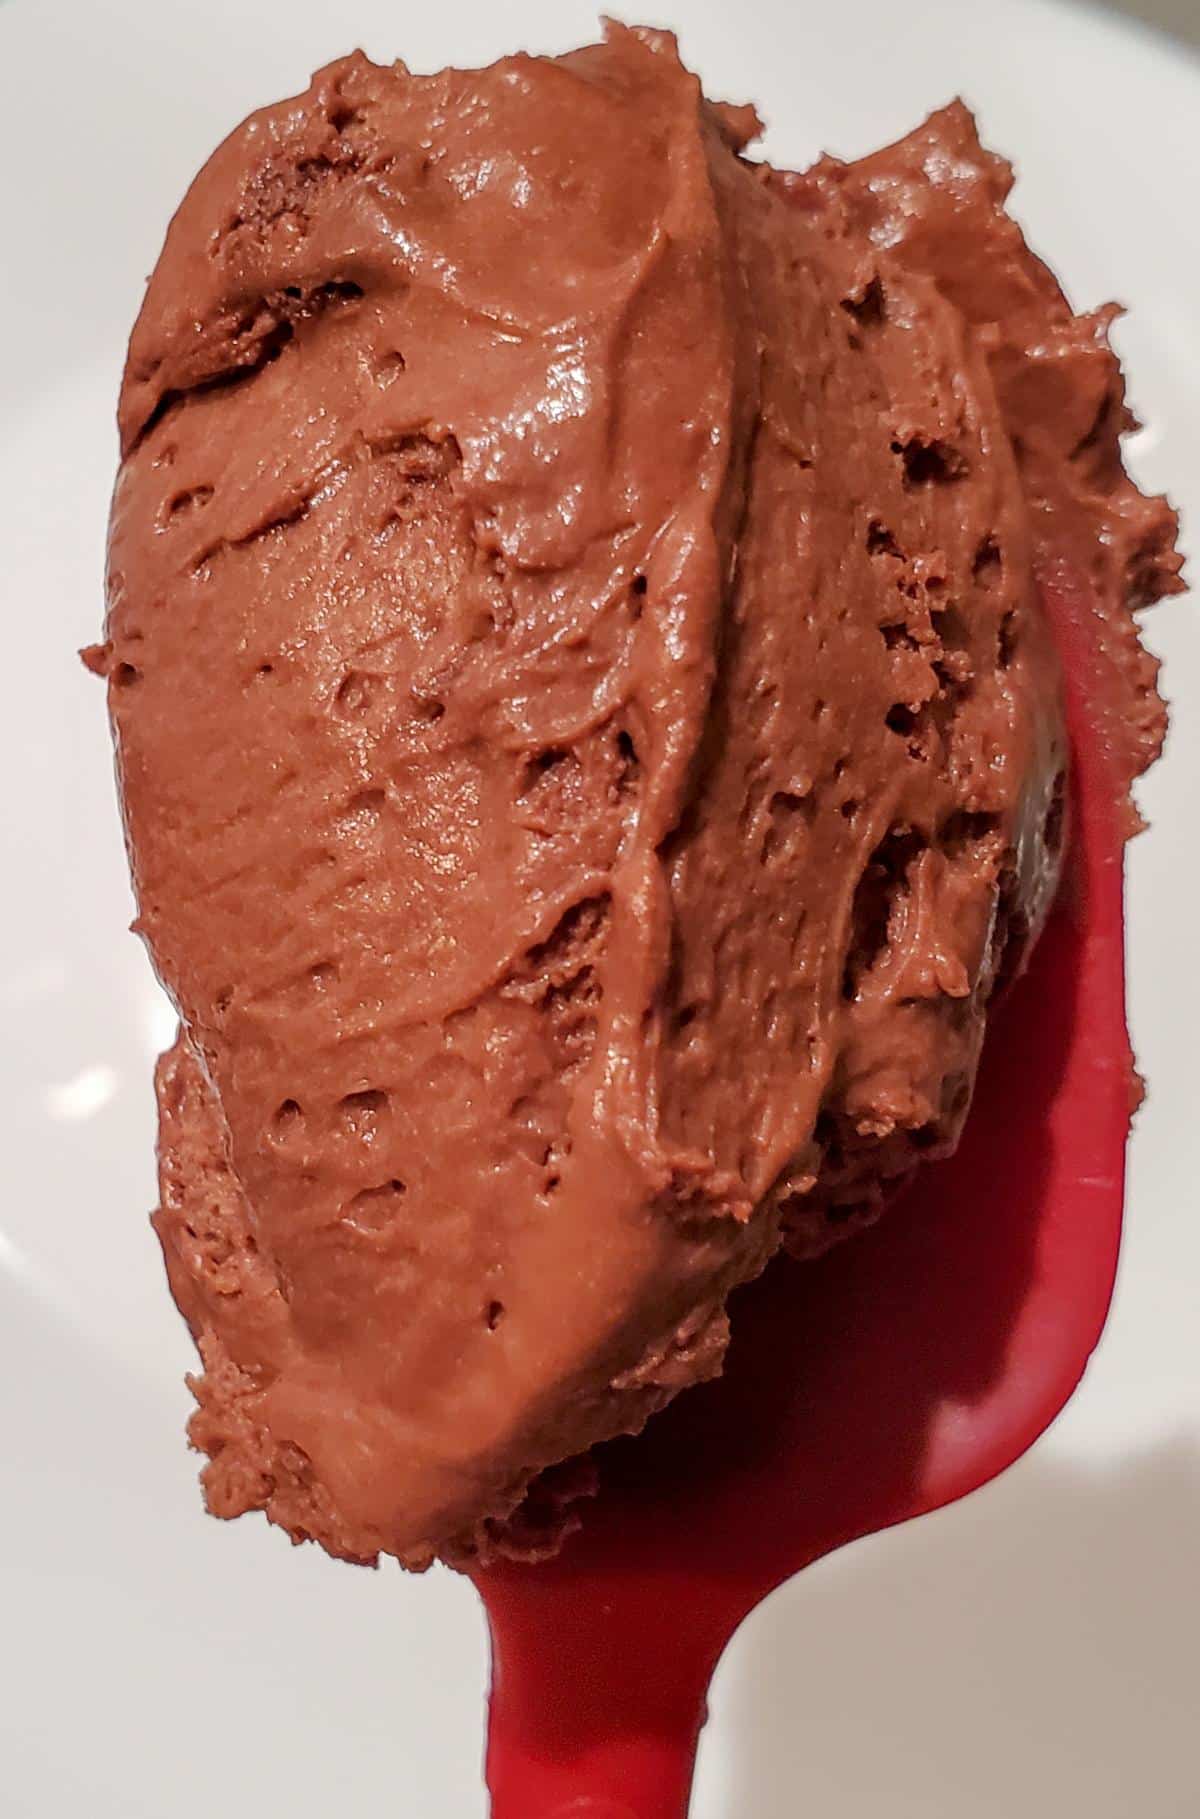 How to make a Chocolate Mousse Recipe